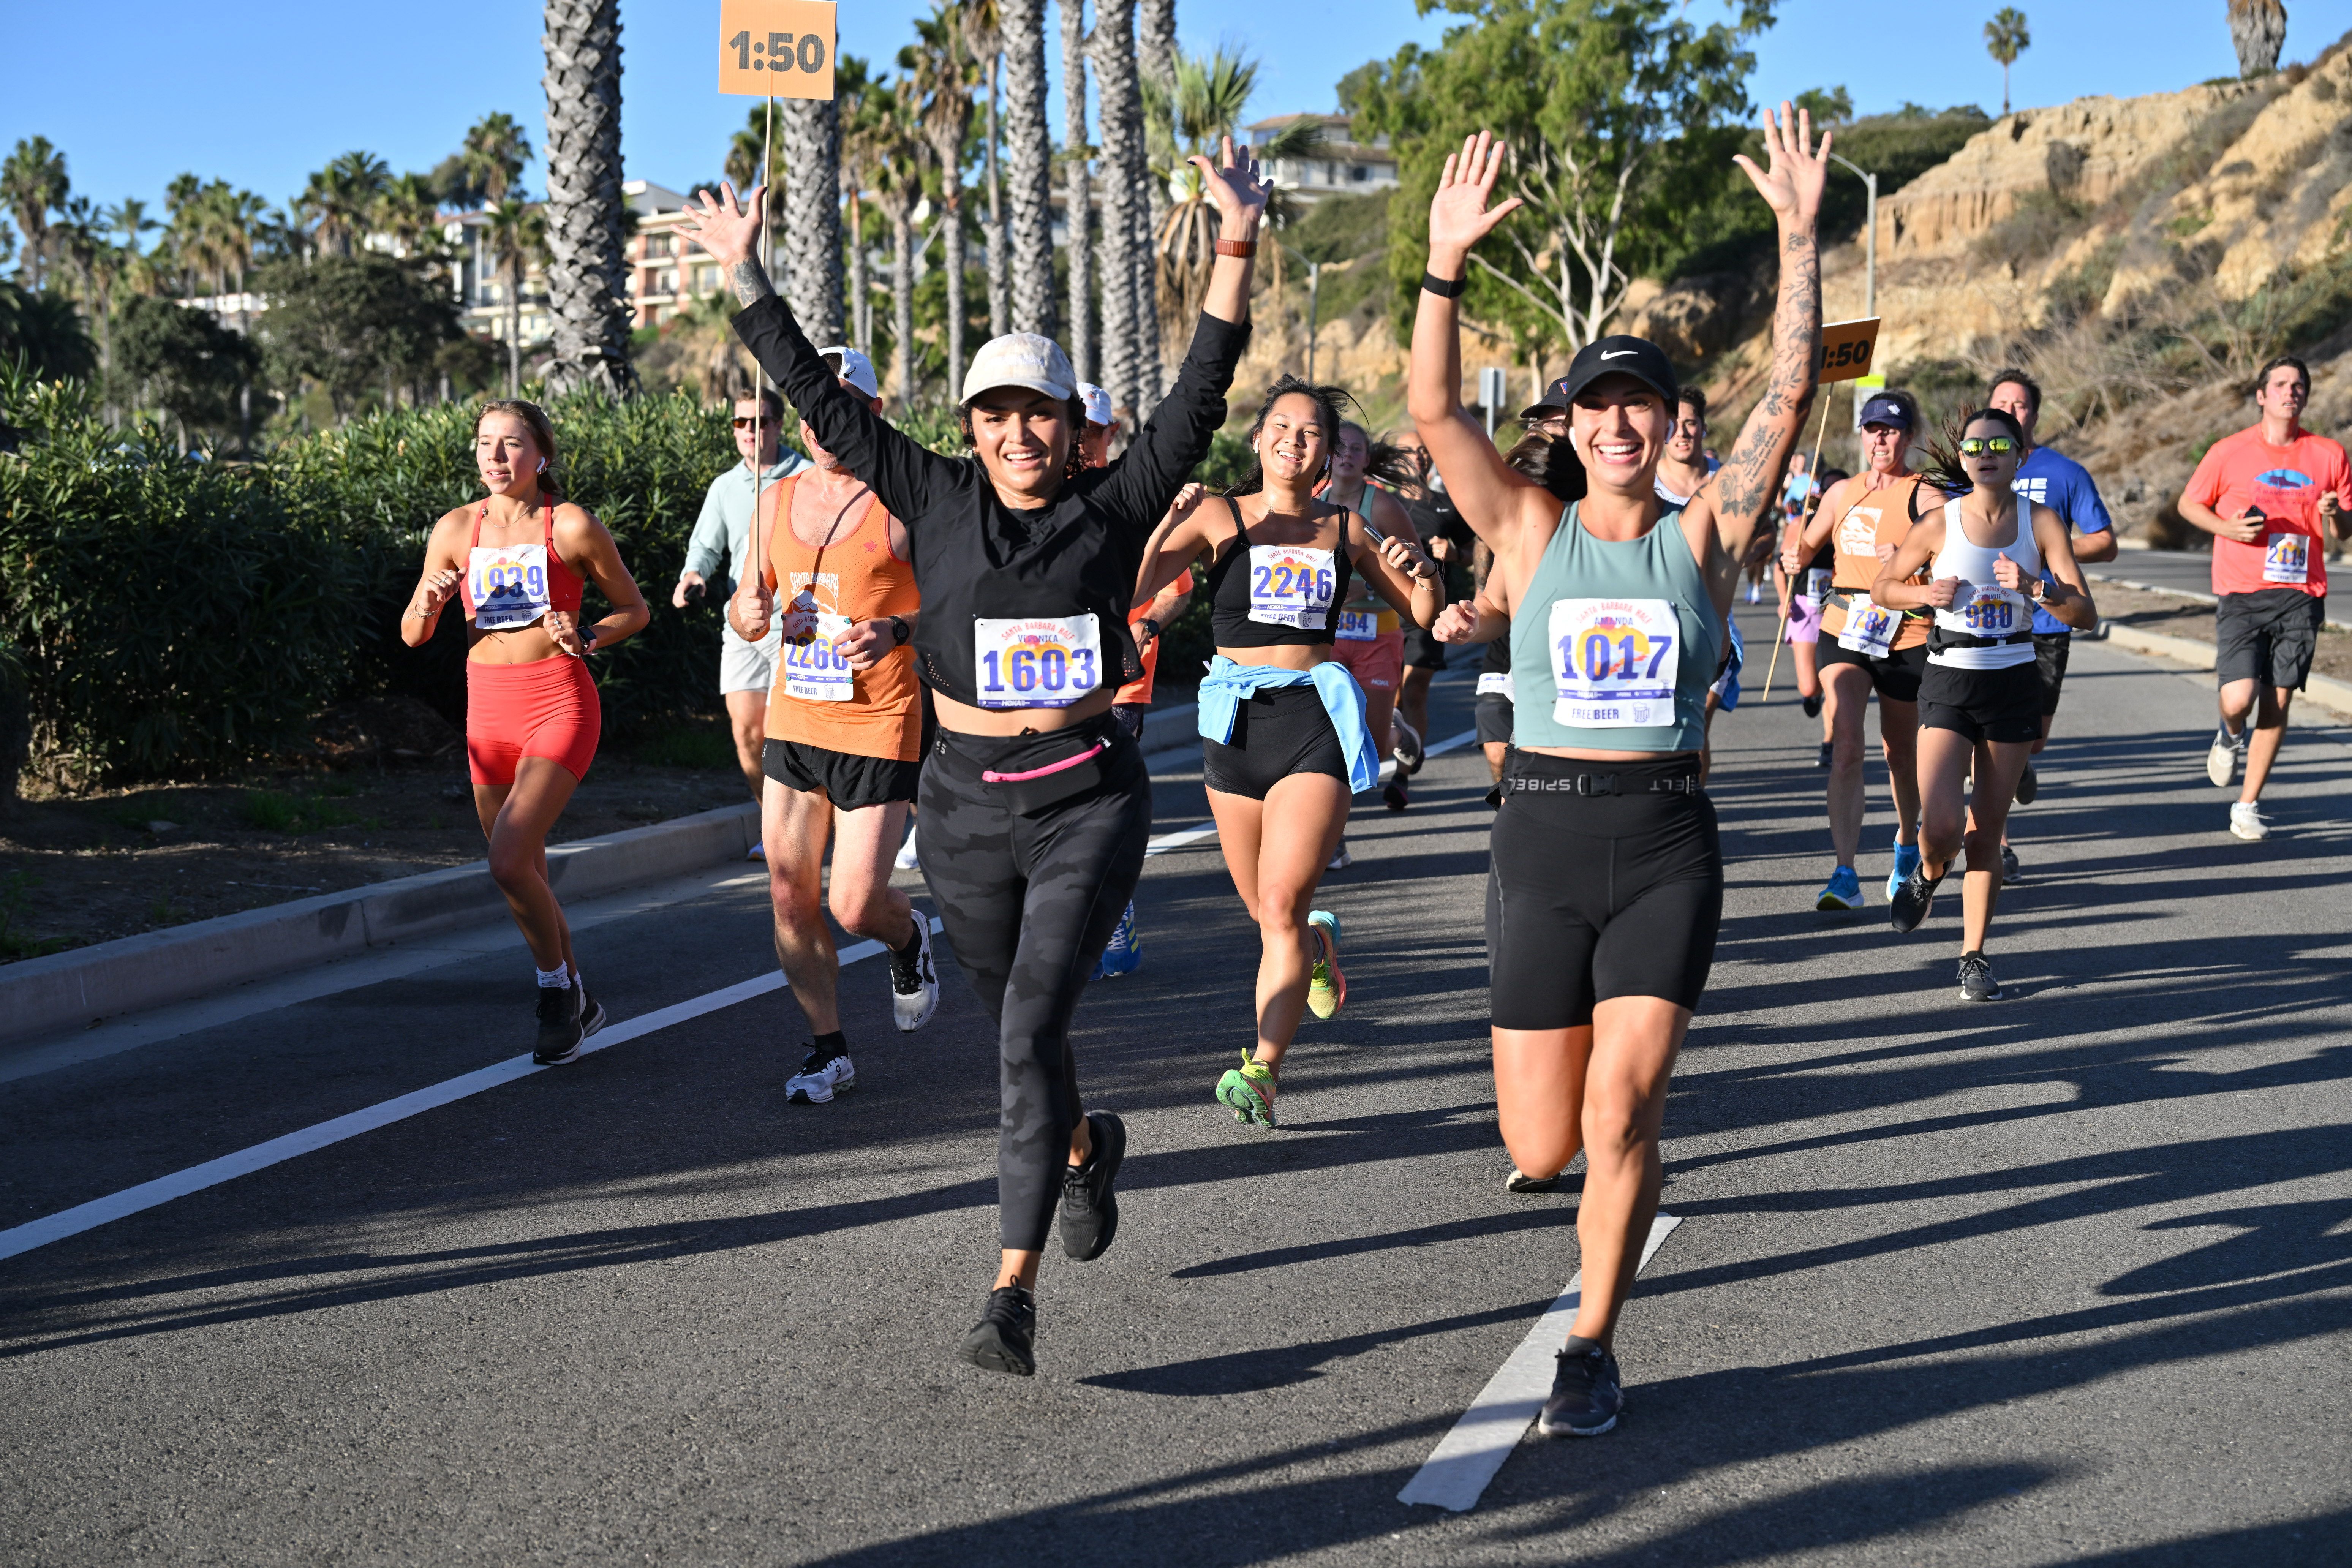 Two women with their hands up at the finish line of the Santa Barbara Half Marathon